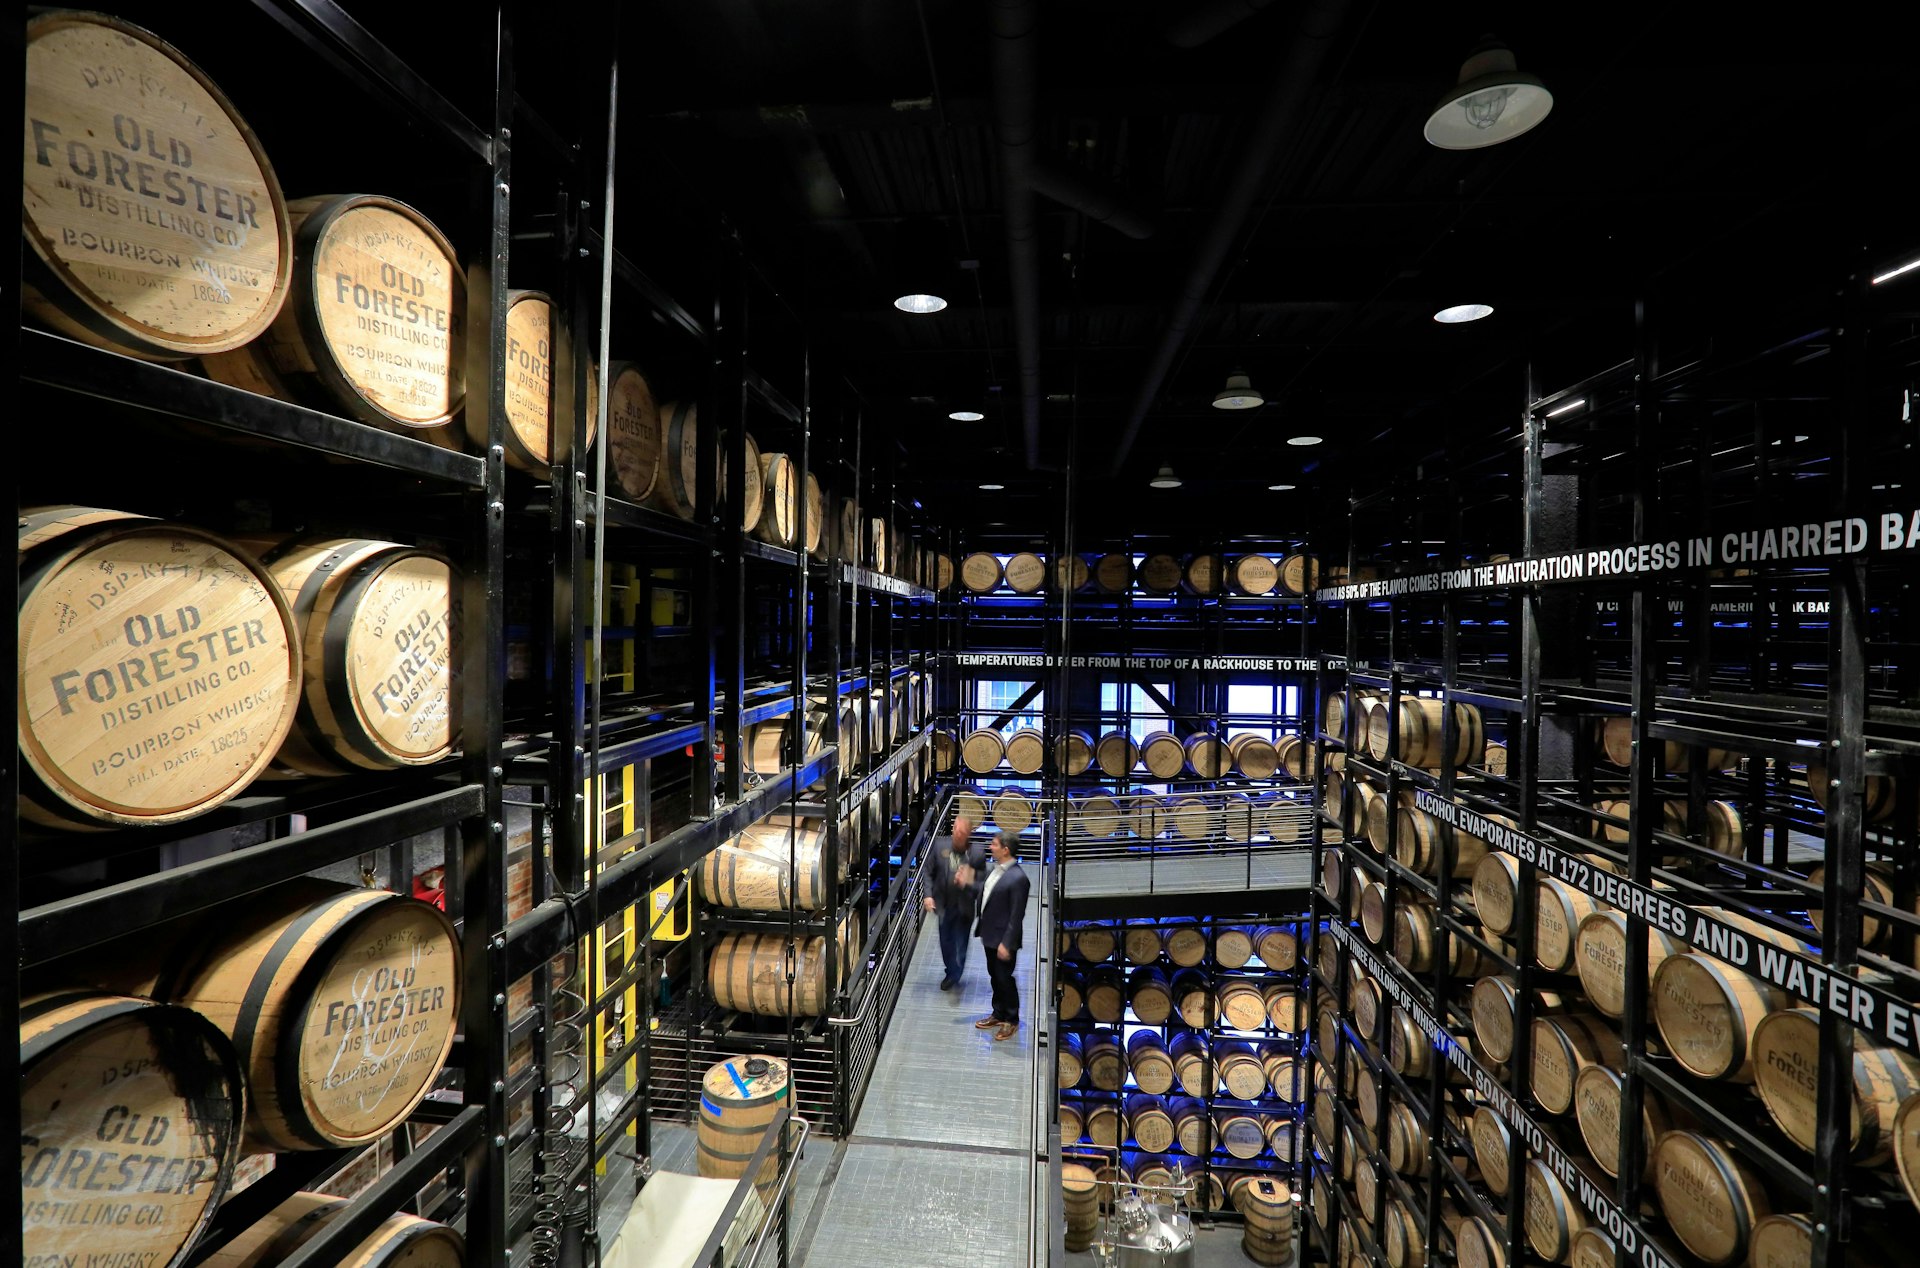 Bourbon barrels piled up at the Old Forester Distilling Co in Whiskey Row, Louisville